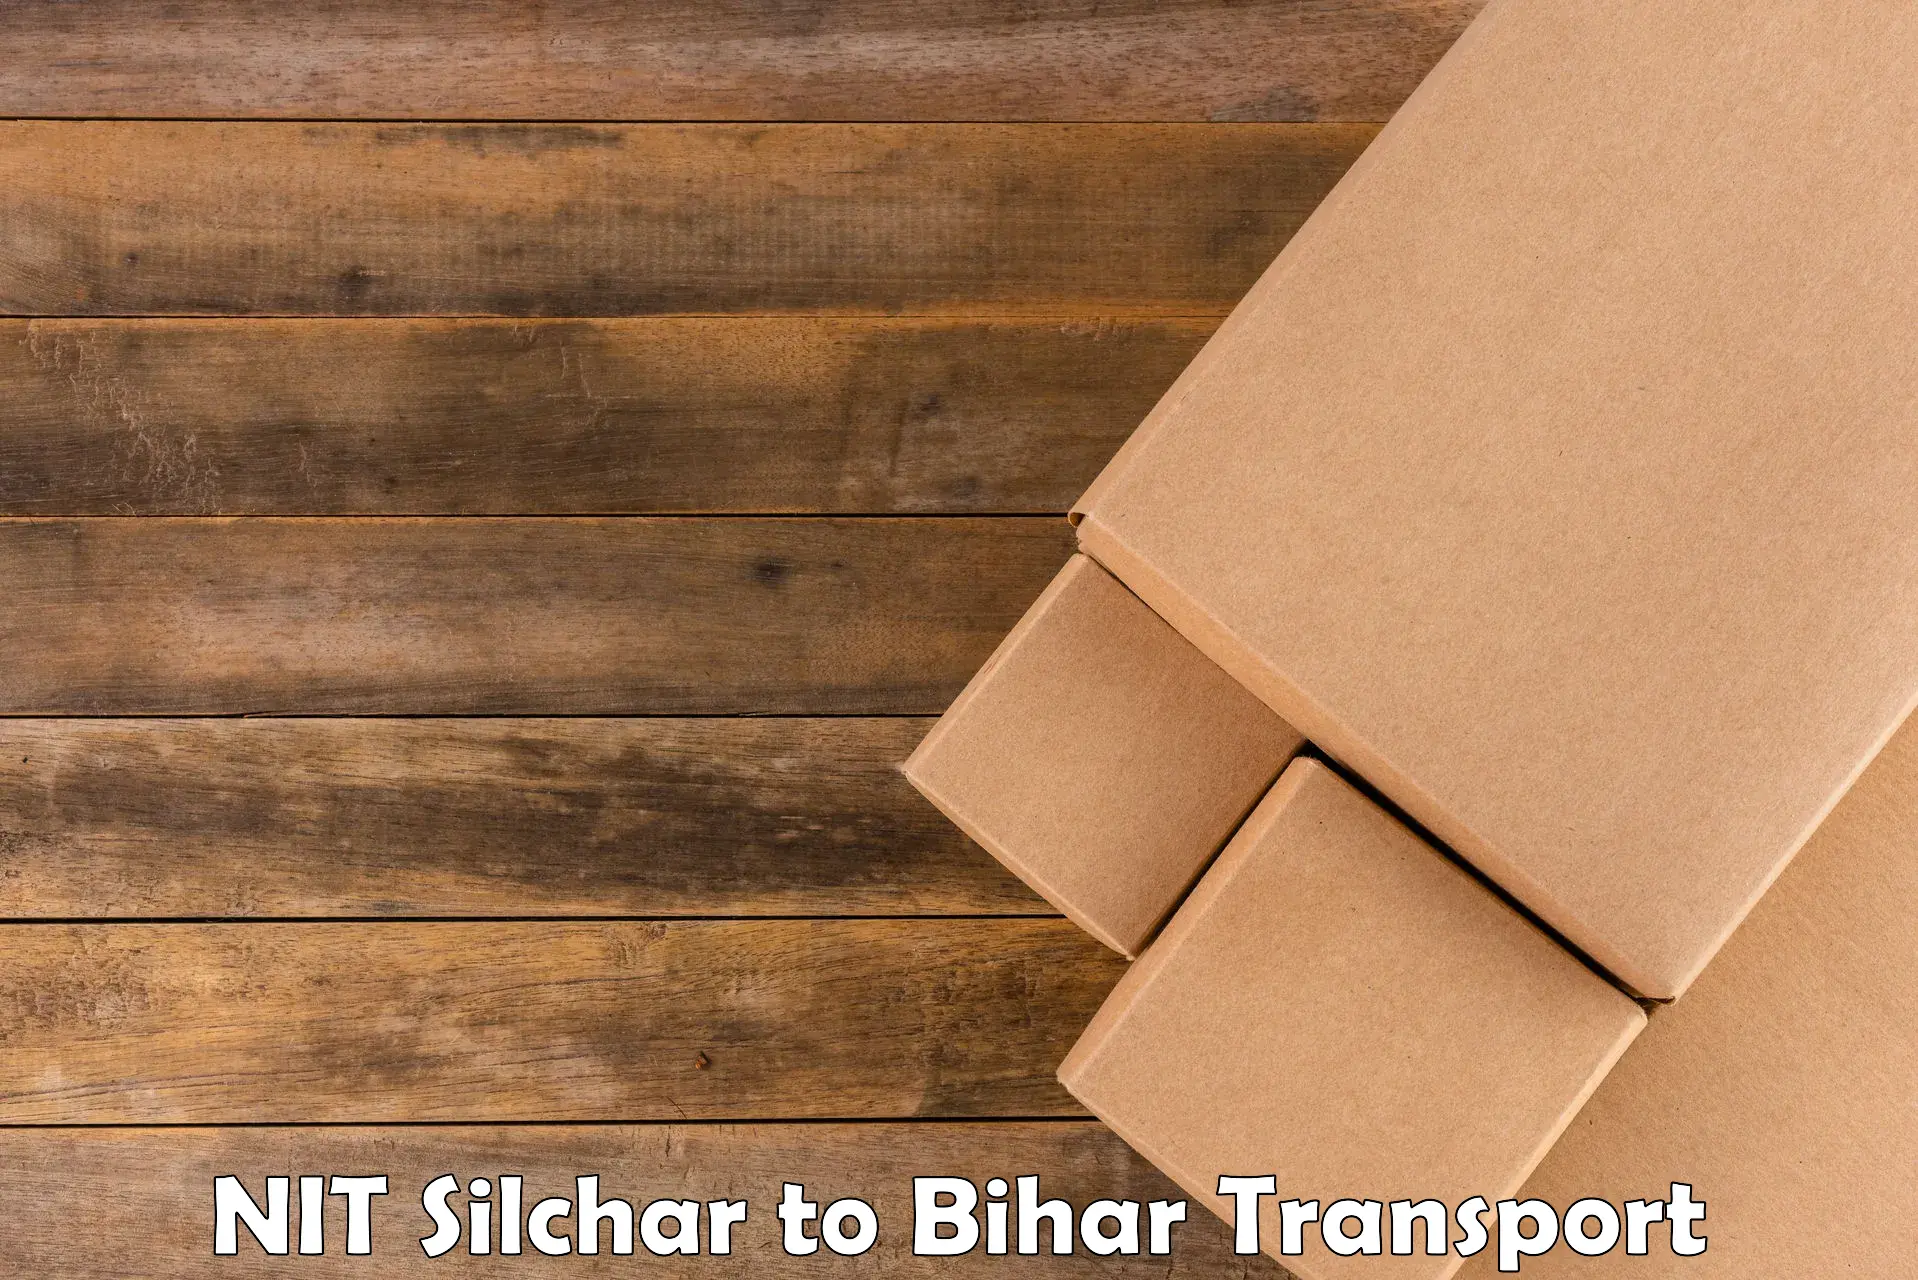 Air cargo transport services in NIT Silchar to Bihar